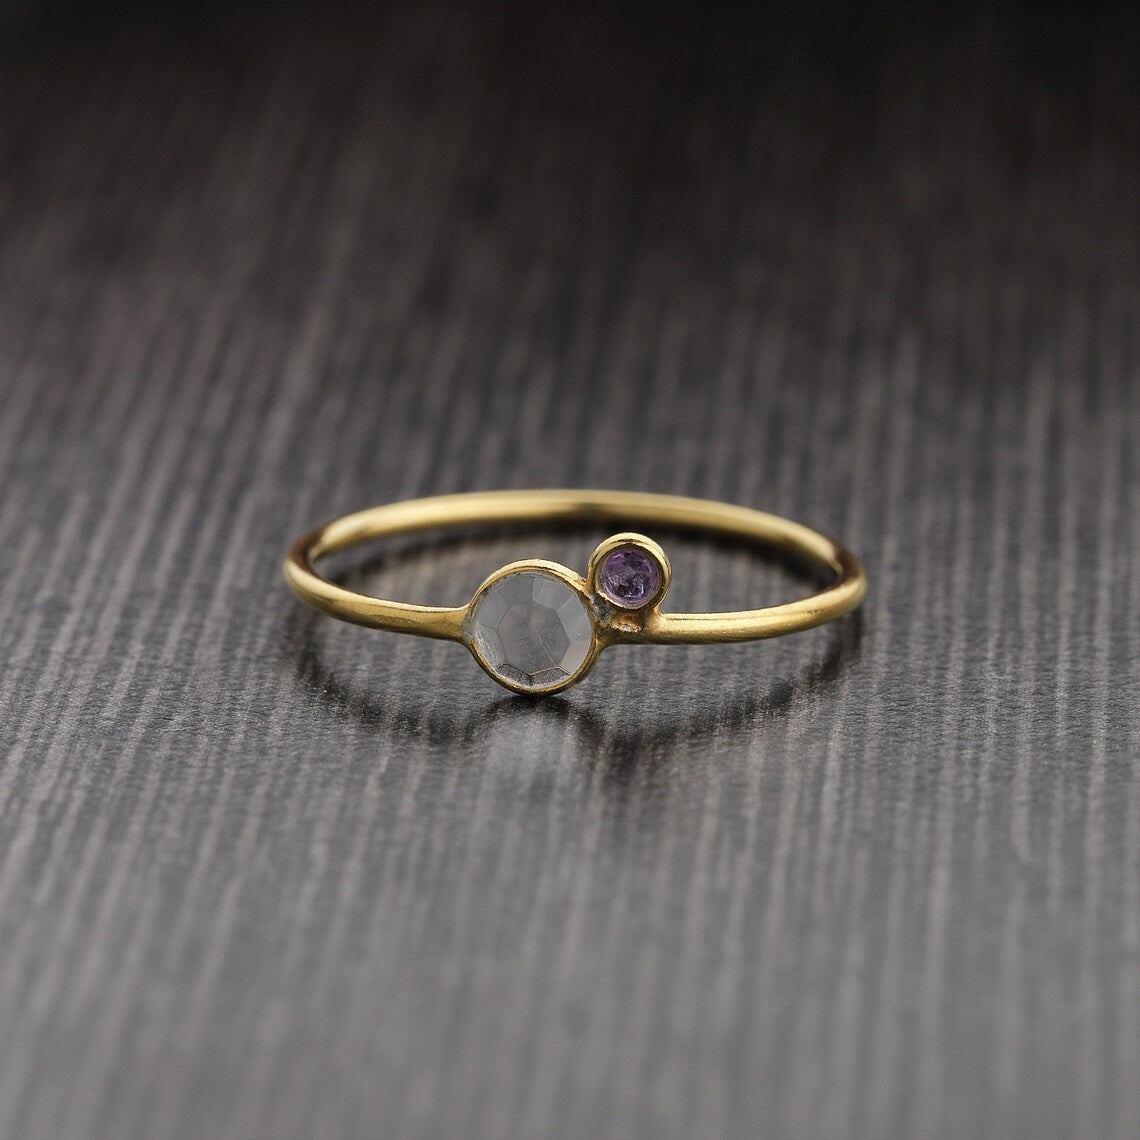 Crystal & Amethyst stack Ring Round amethyst stacking Ring -18k Gold Plated -Solid Silver Ring- Unique Ring Designer Ring -Women Ring